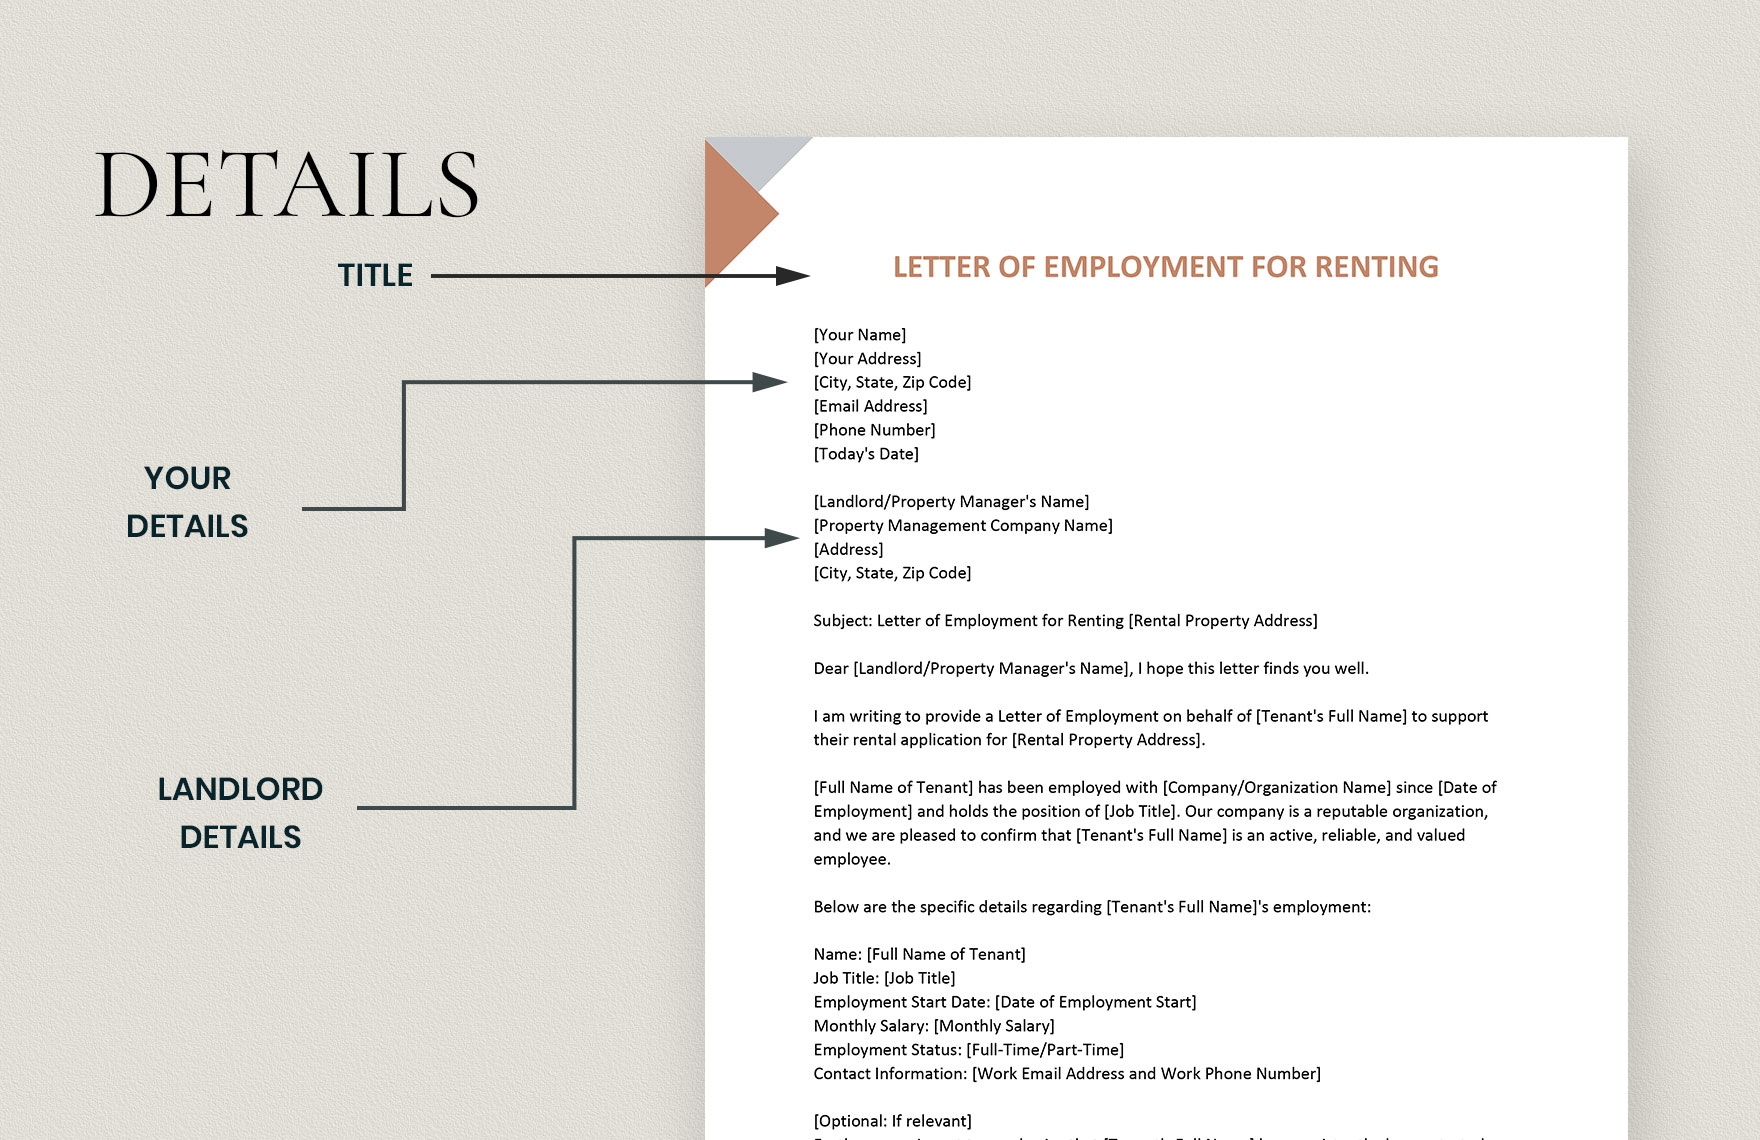 Letter of Employment for Renting